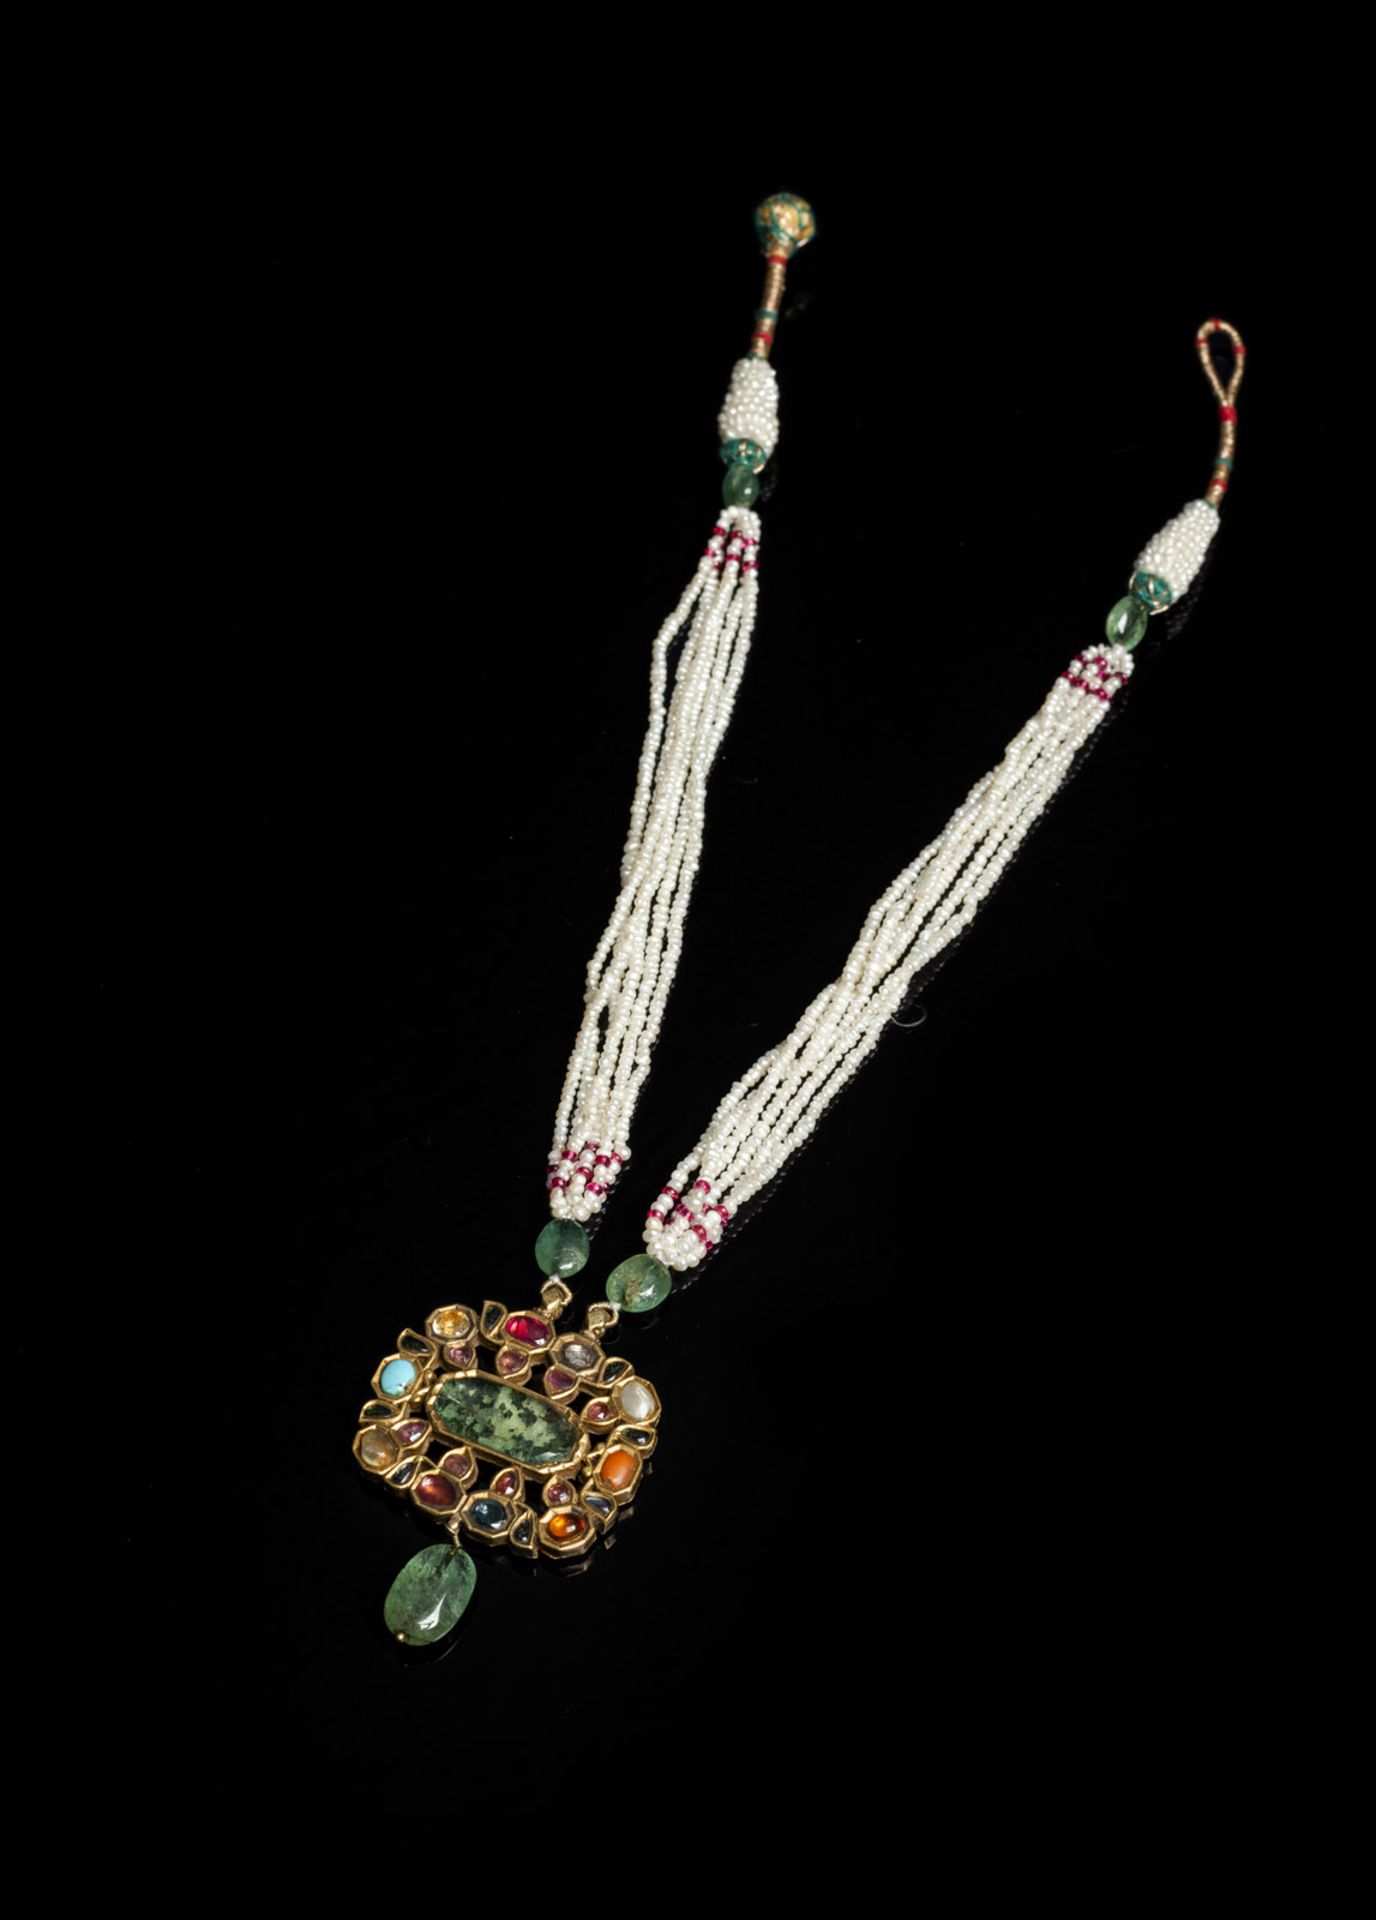 A PEARL NECKLACE WITH INLAID GOLD PENDANT IN MUGHAL STYLE - Image 2 of 5